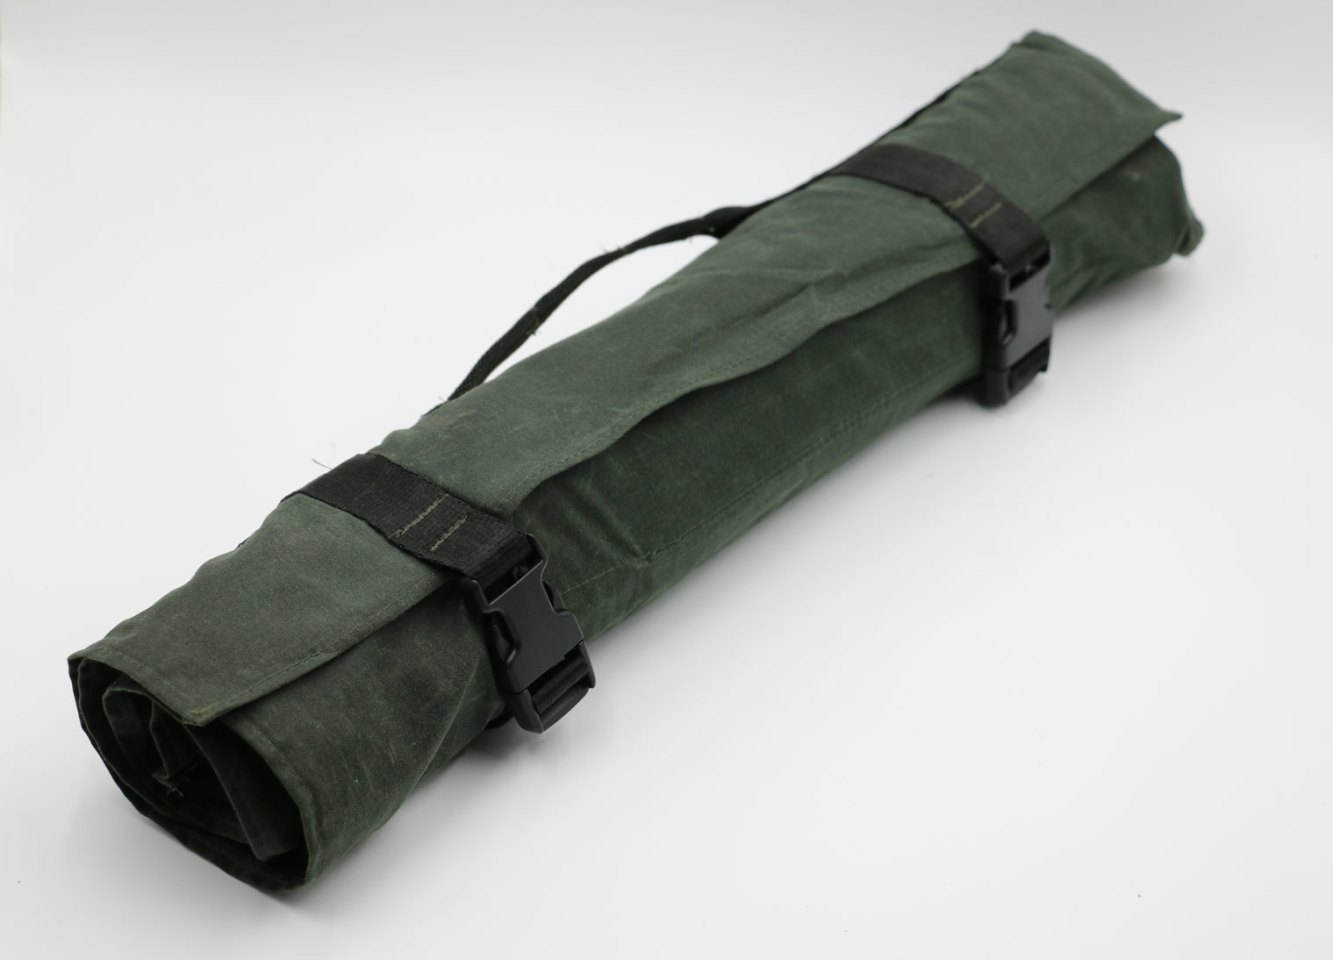 The included roll packs everything into easy carry/store form